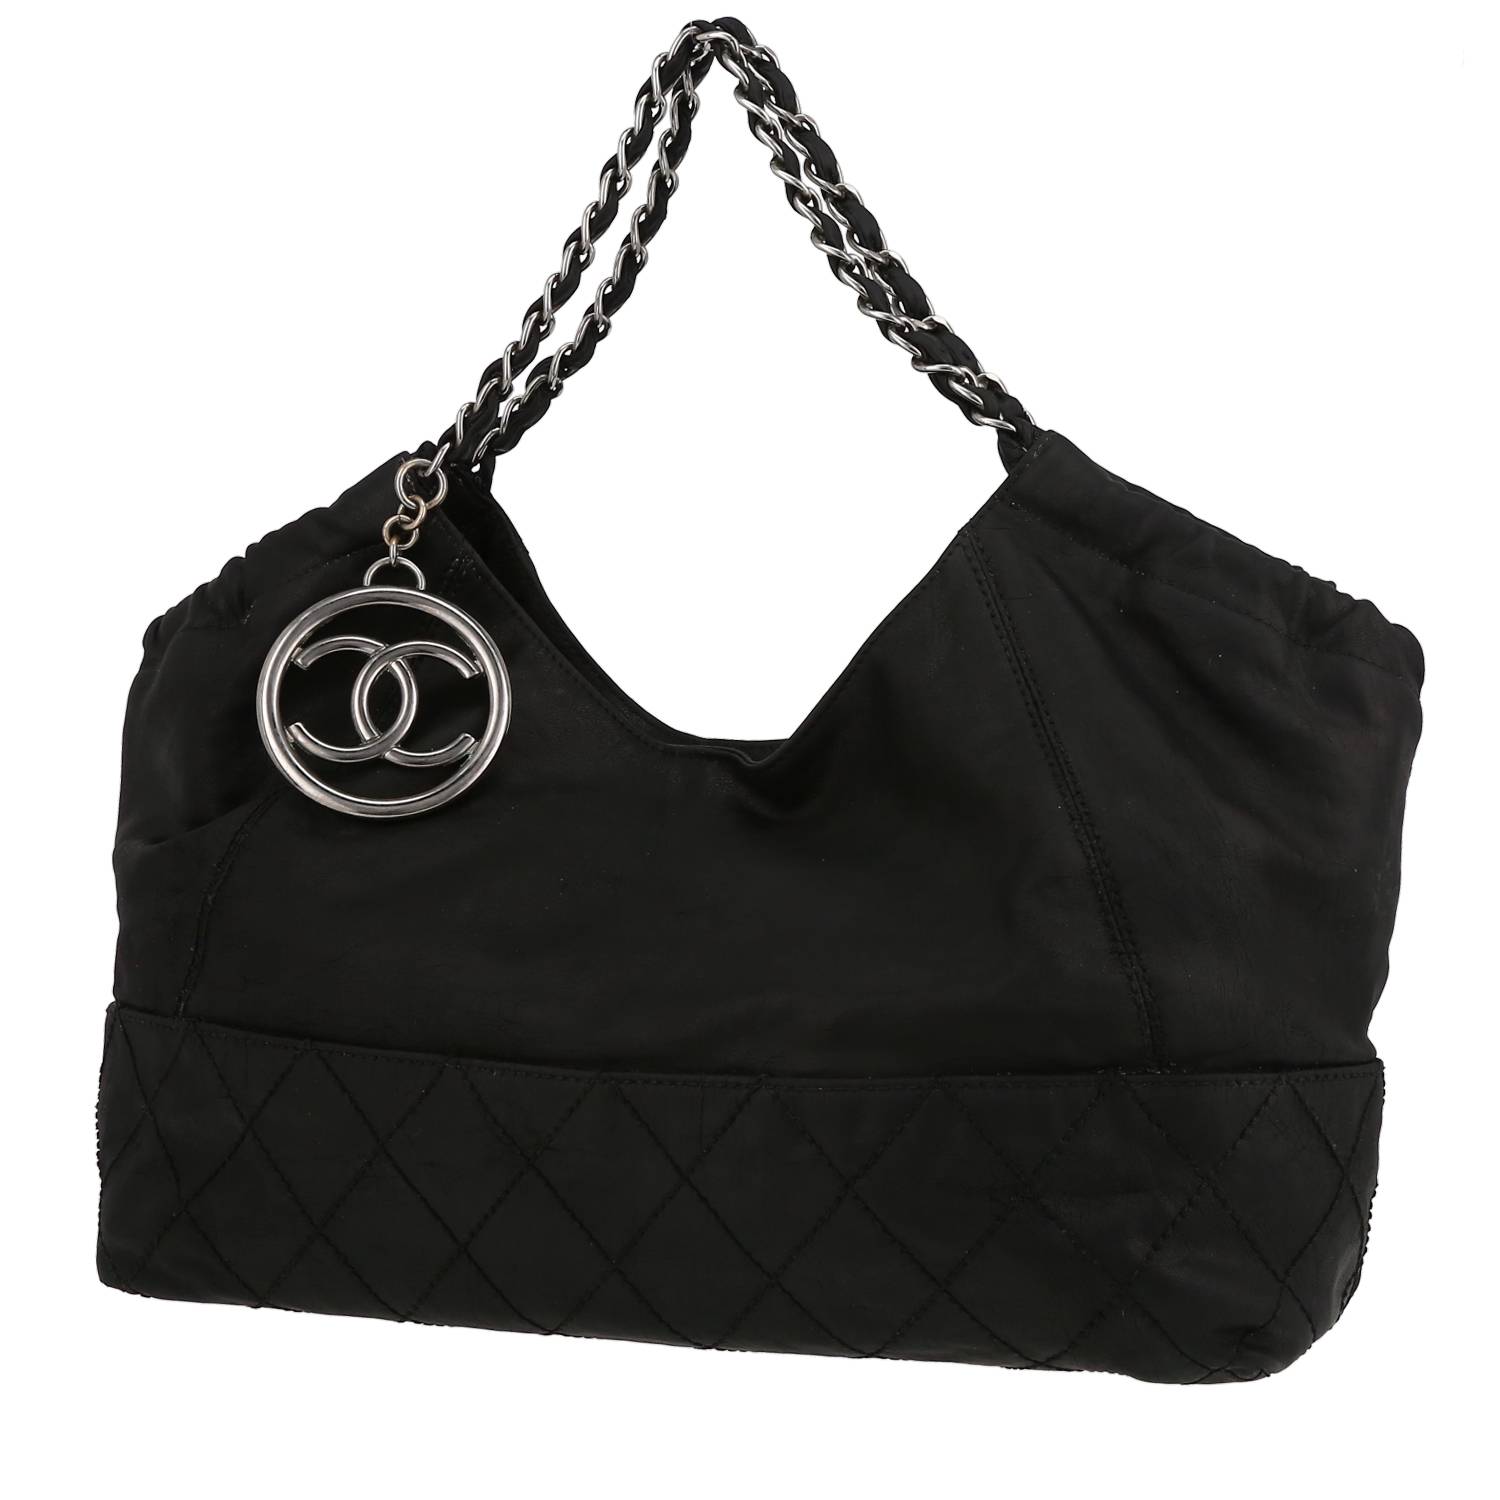 The Cabas tote - Mademoiselle